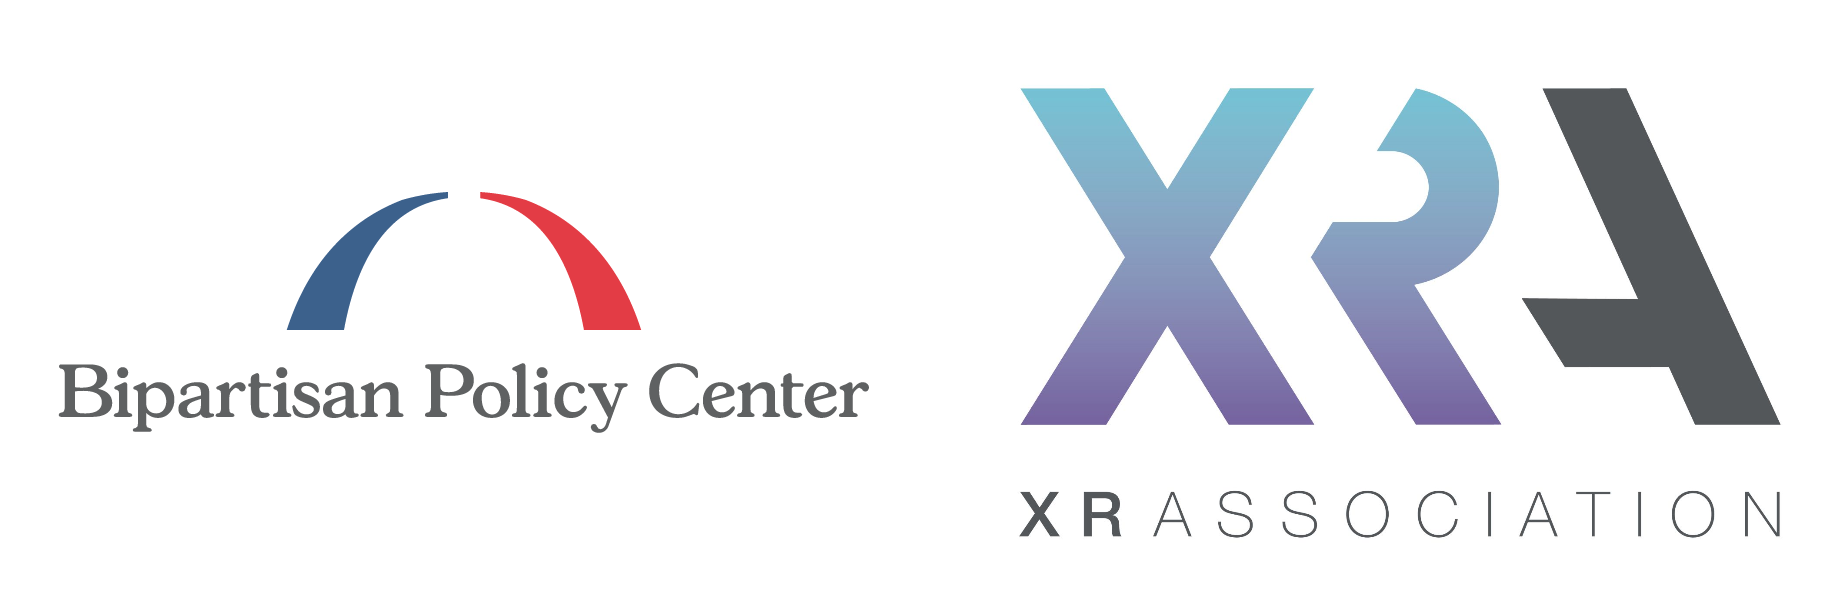 XRA CEO TOUTS GAME-CHANGING NATURE OF XR AT BPC EVENT